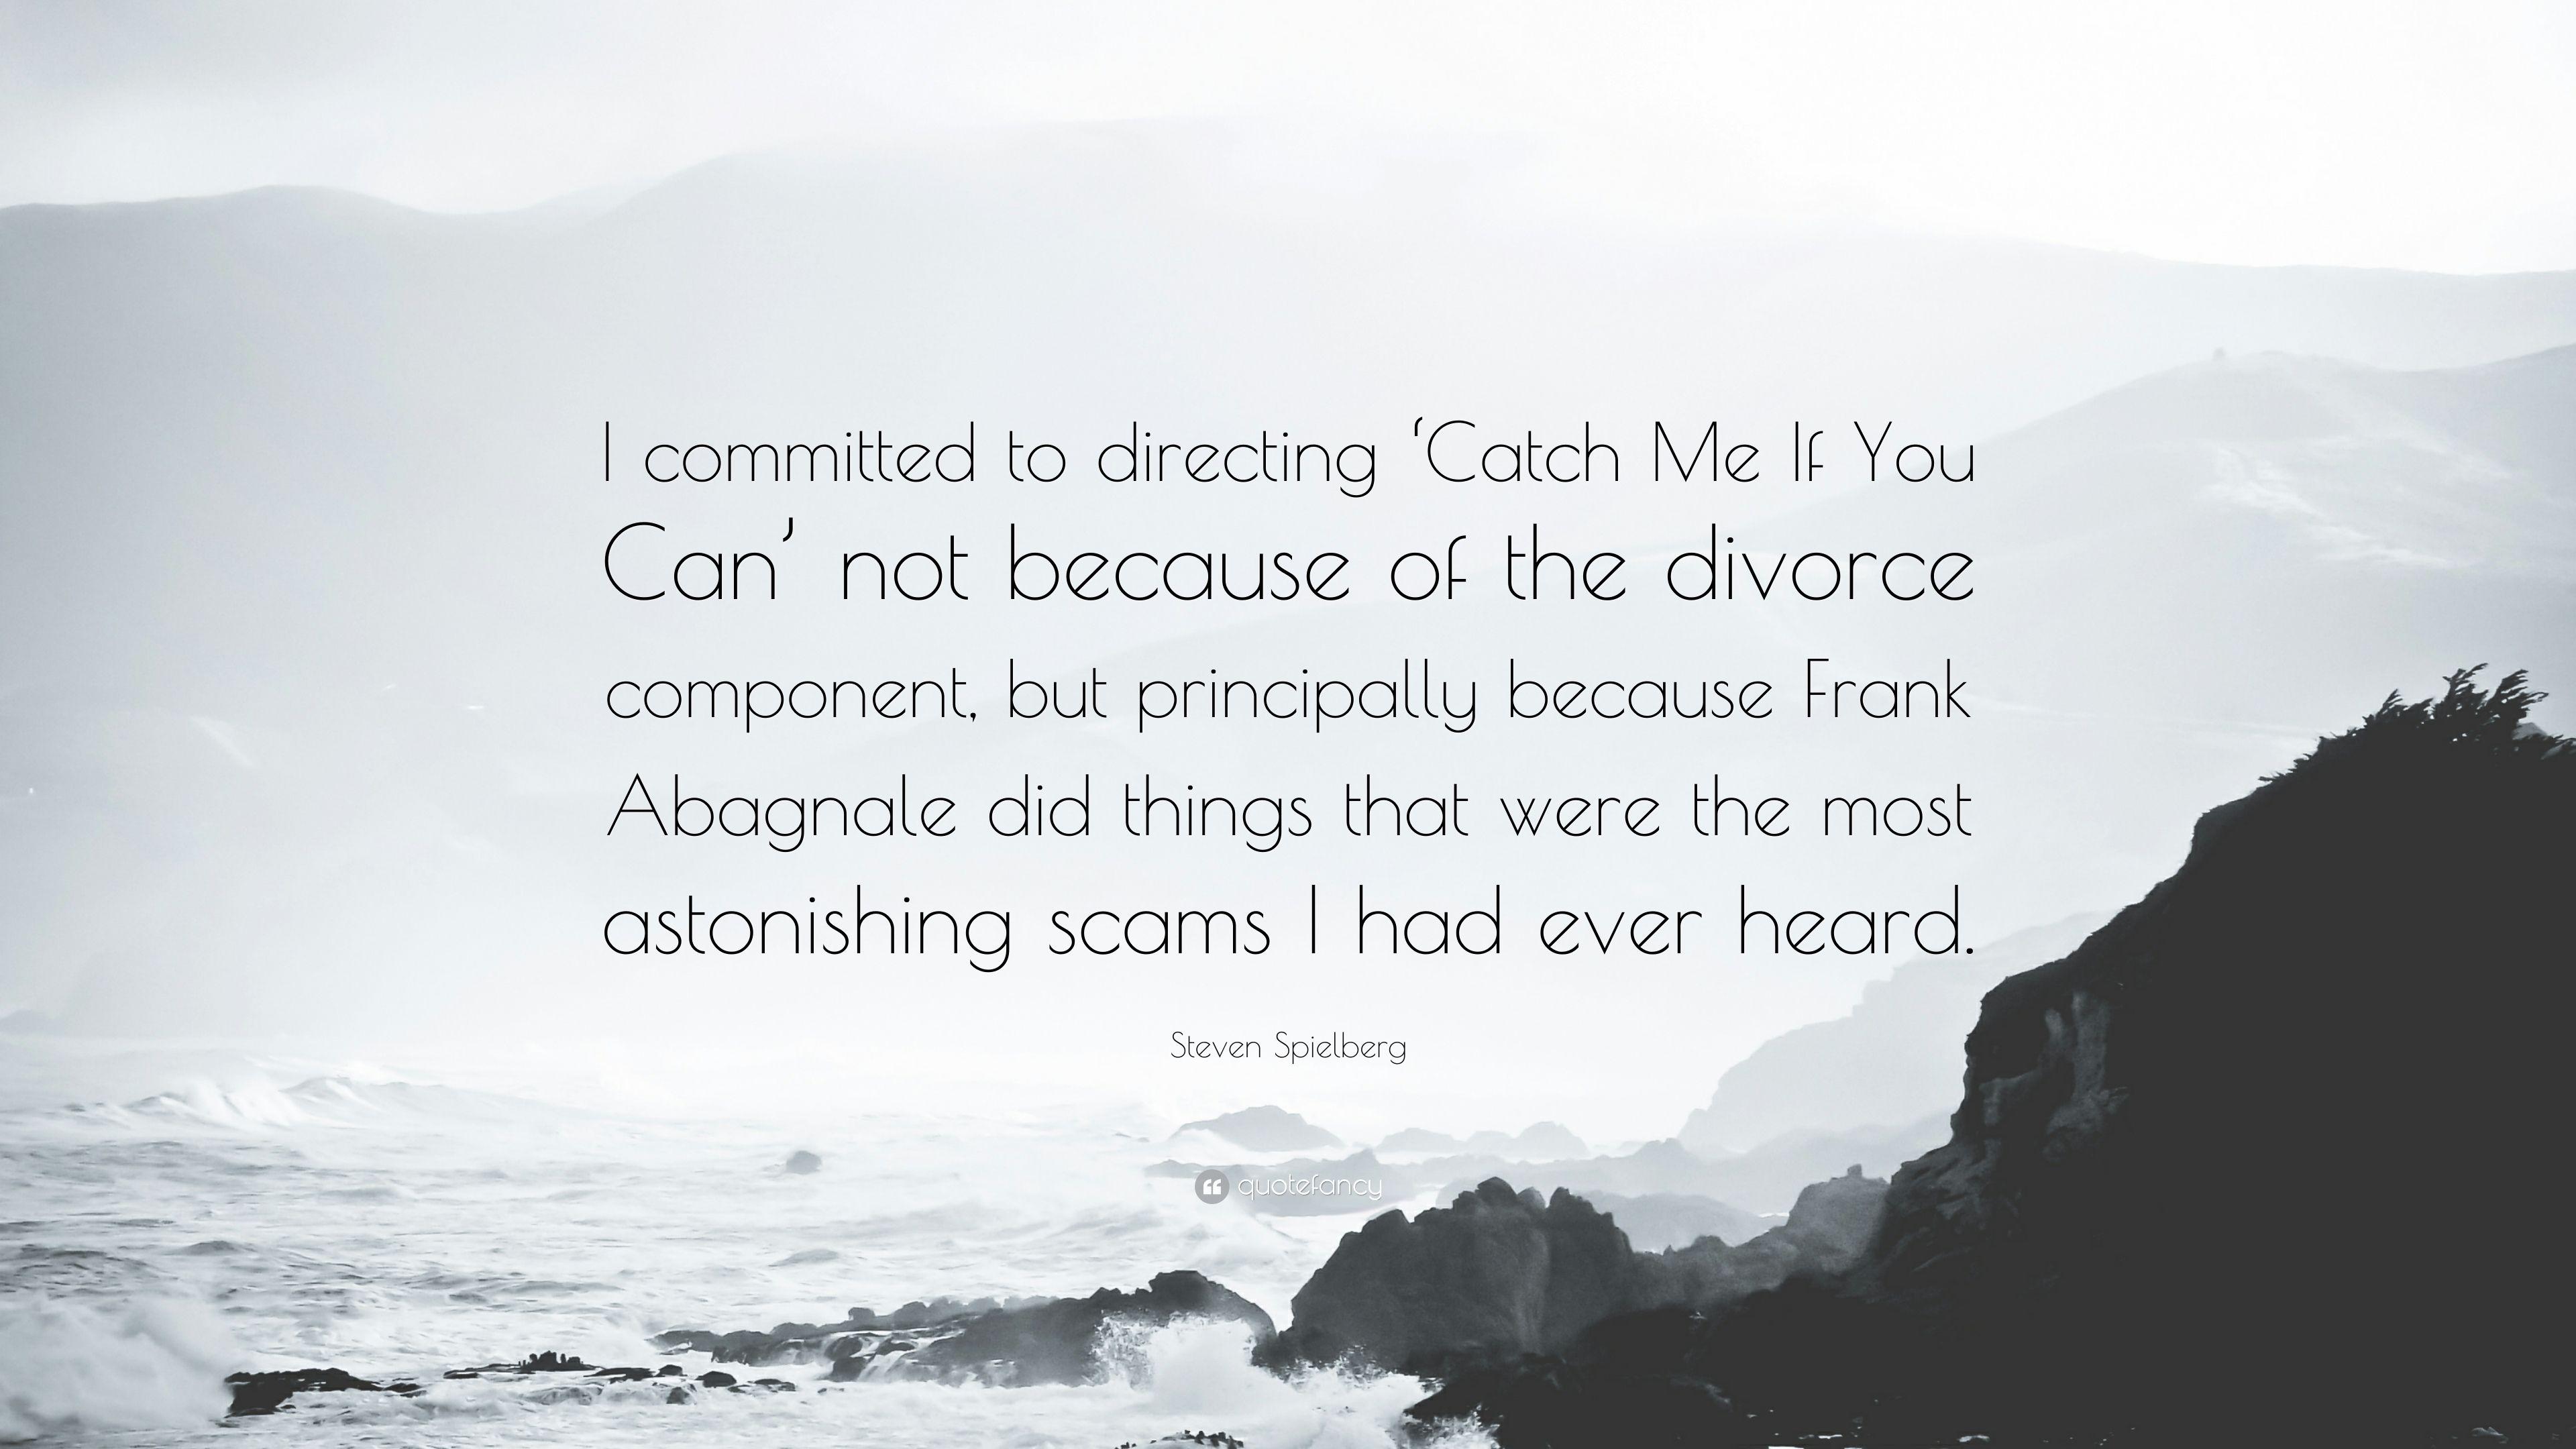 Steven Spielberg Quote: “I committed to directing 'Catch Me If You